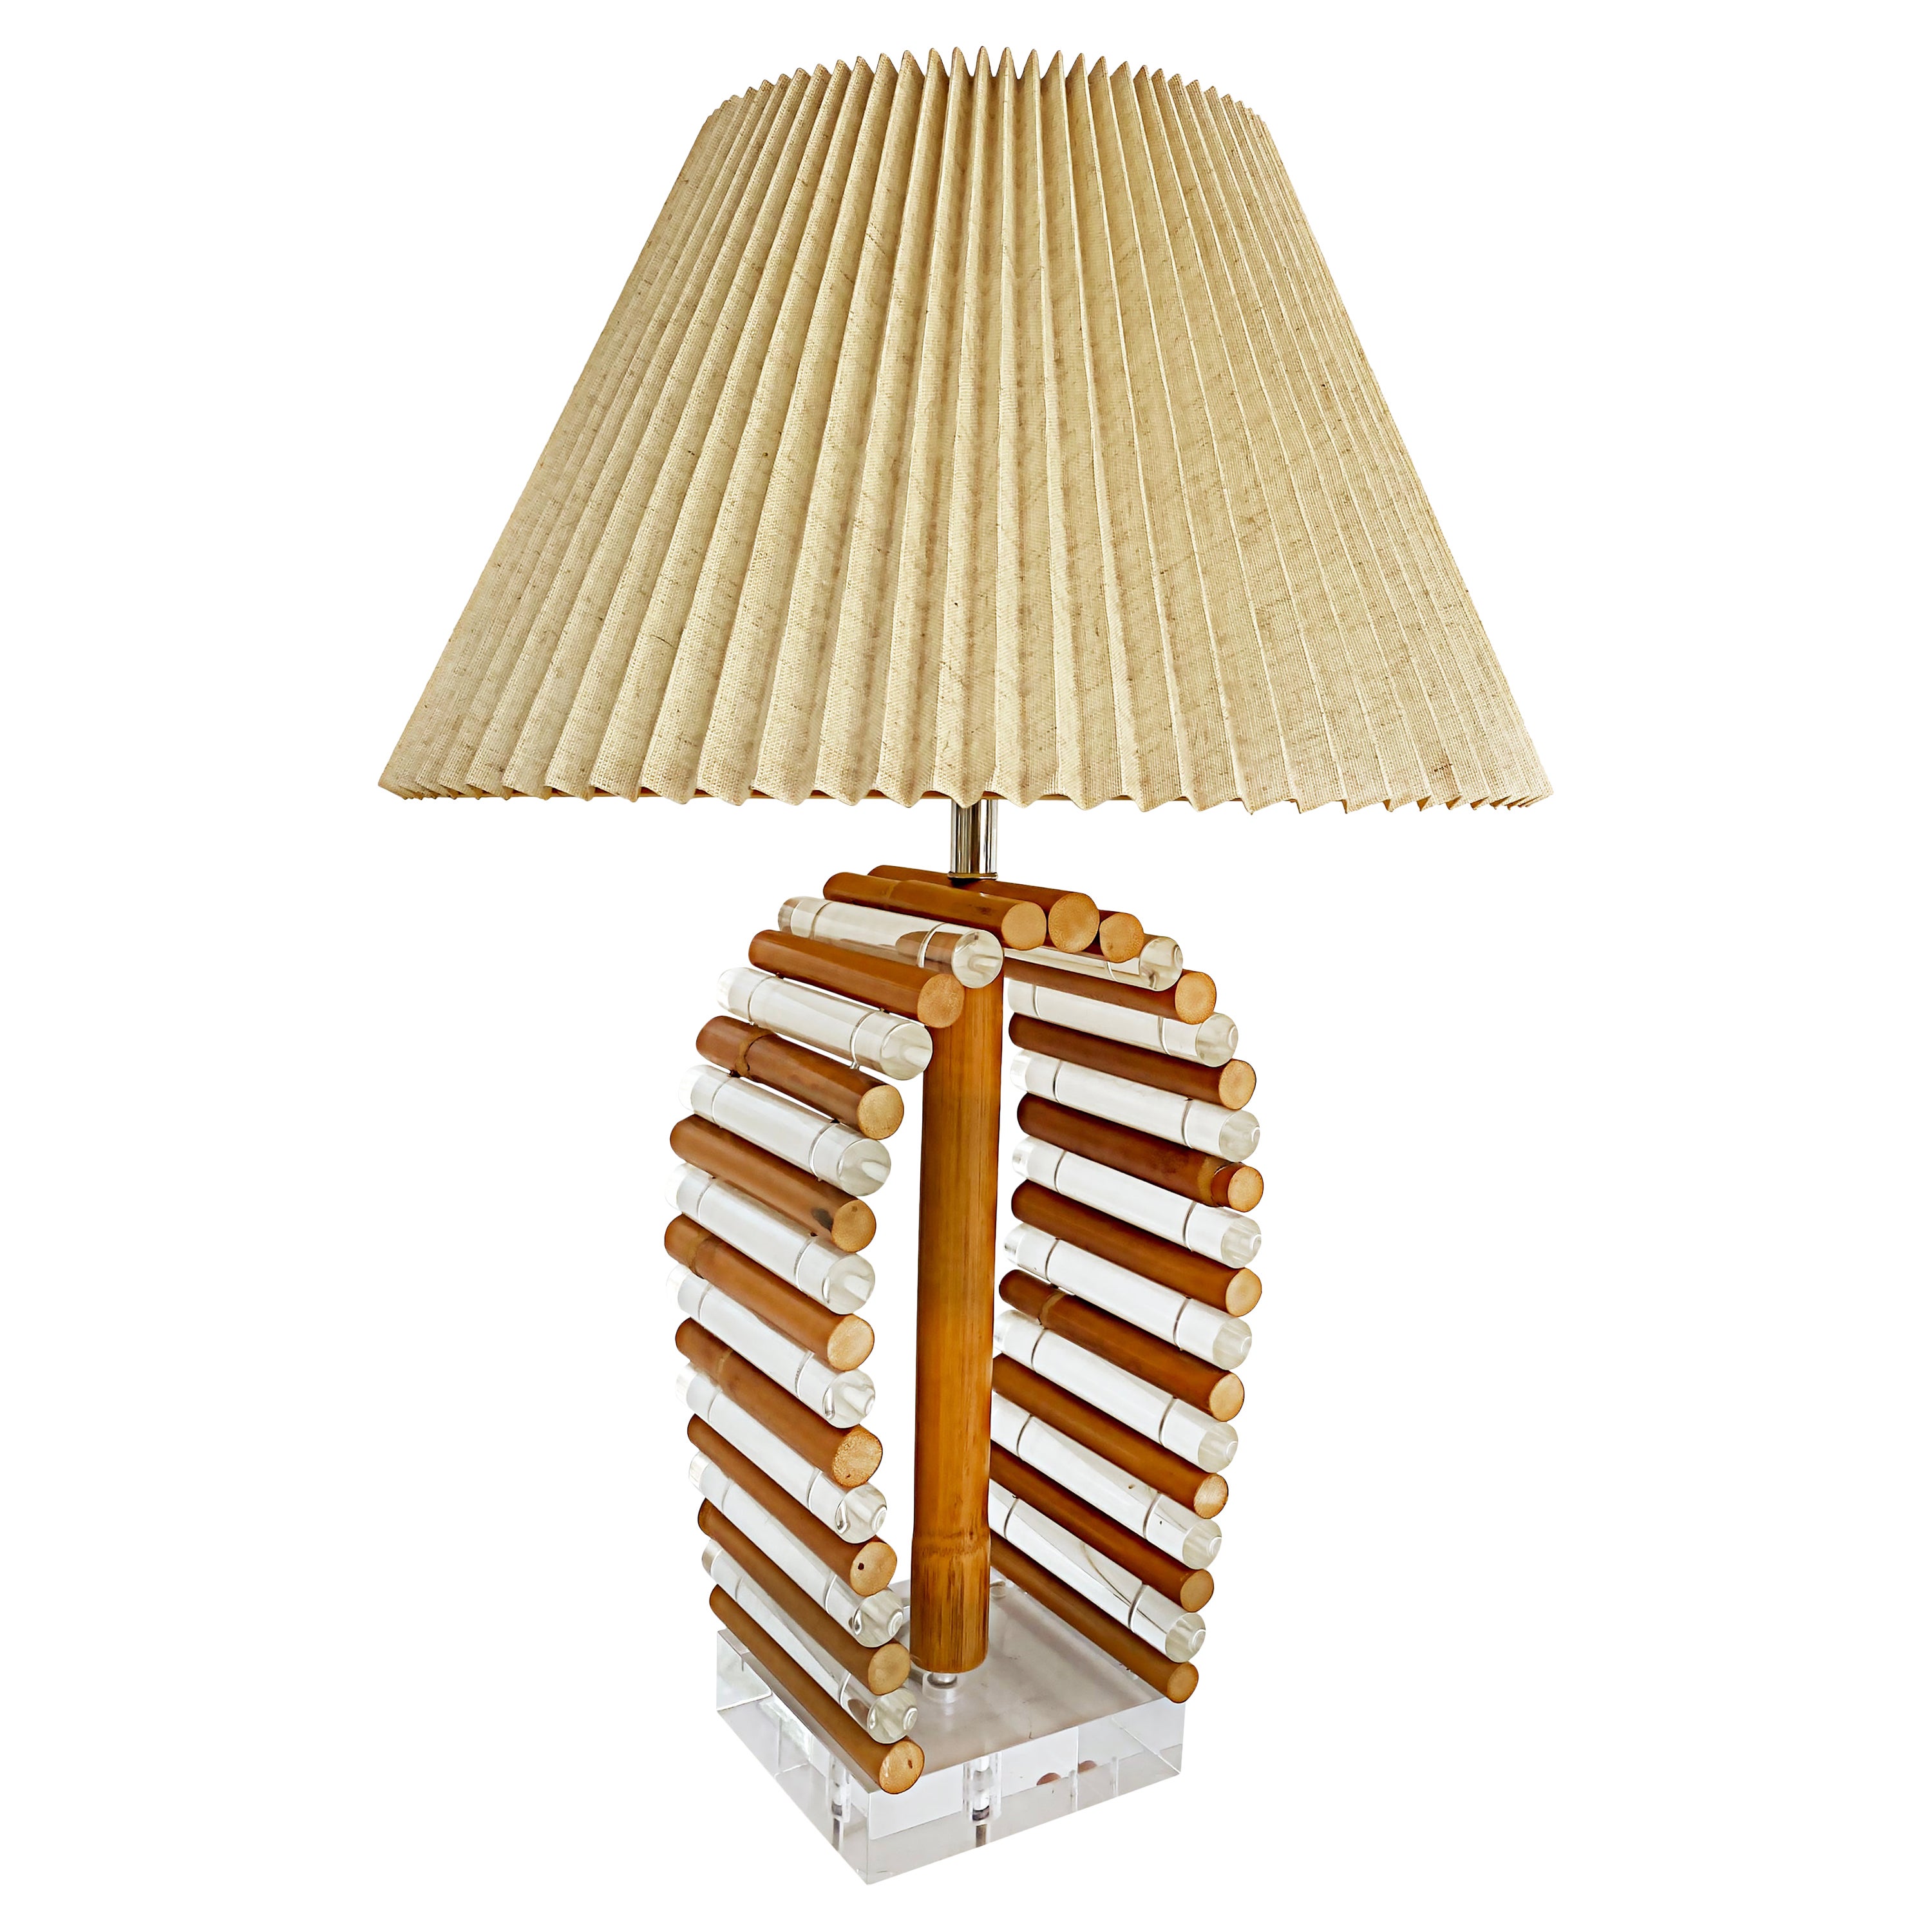 Mid-Century Modern Rattan Lucite Table Lamp with Original Finial